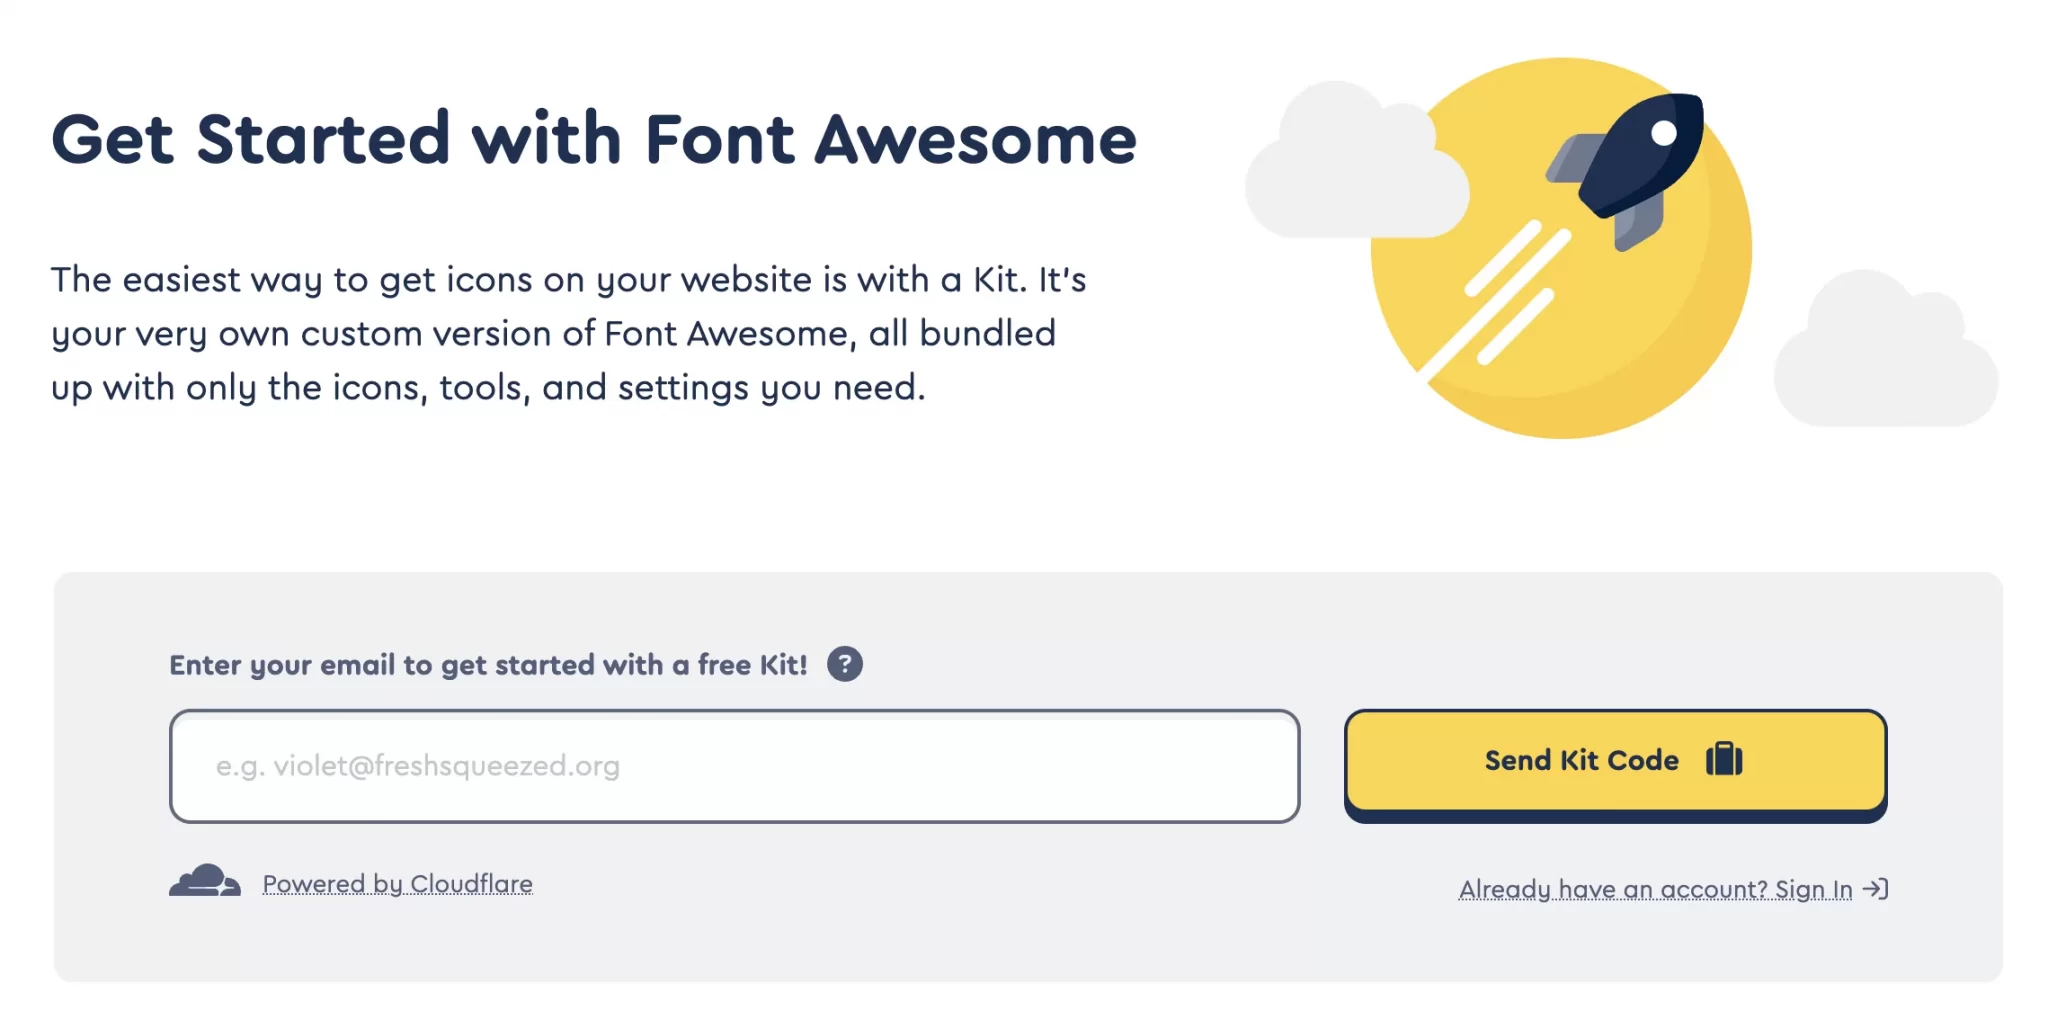 Font Awesome is a font that allows you to display vector icons on your WordPress site.